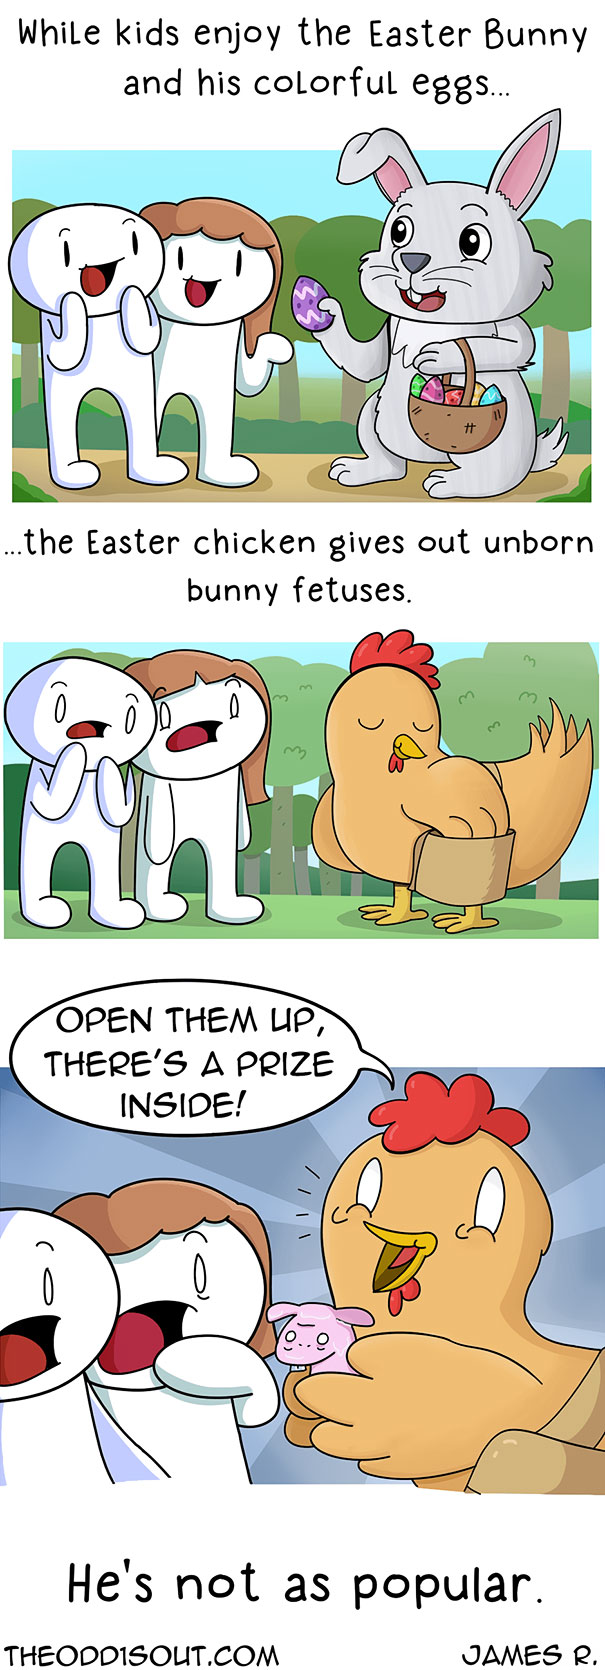 The Easter Chicken